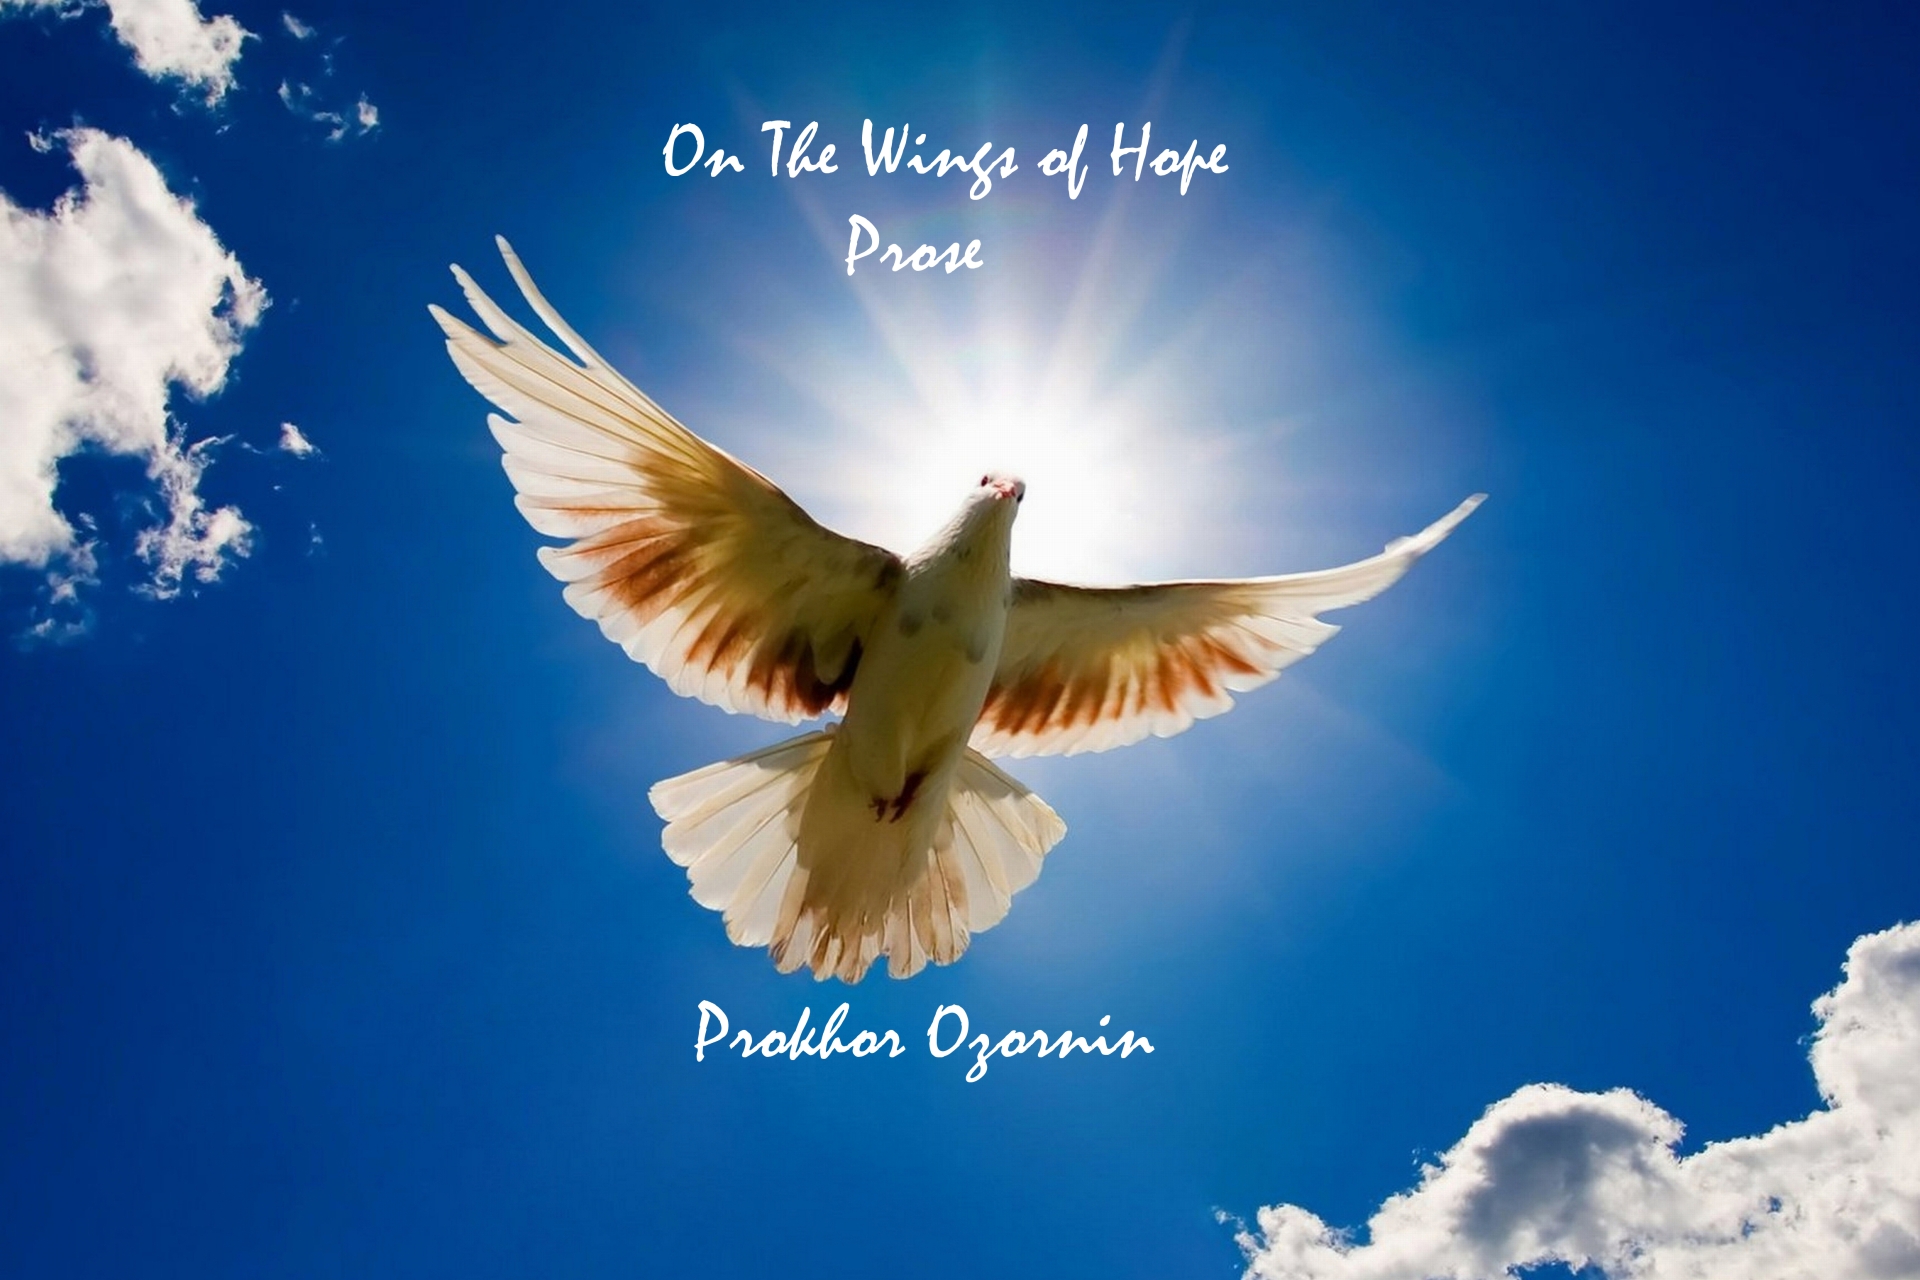 On the Wings of Hope Prose